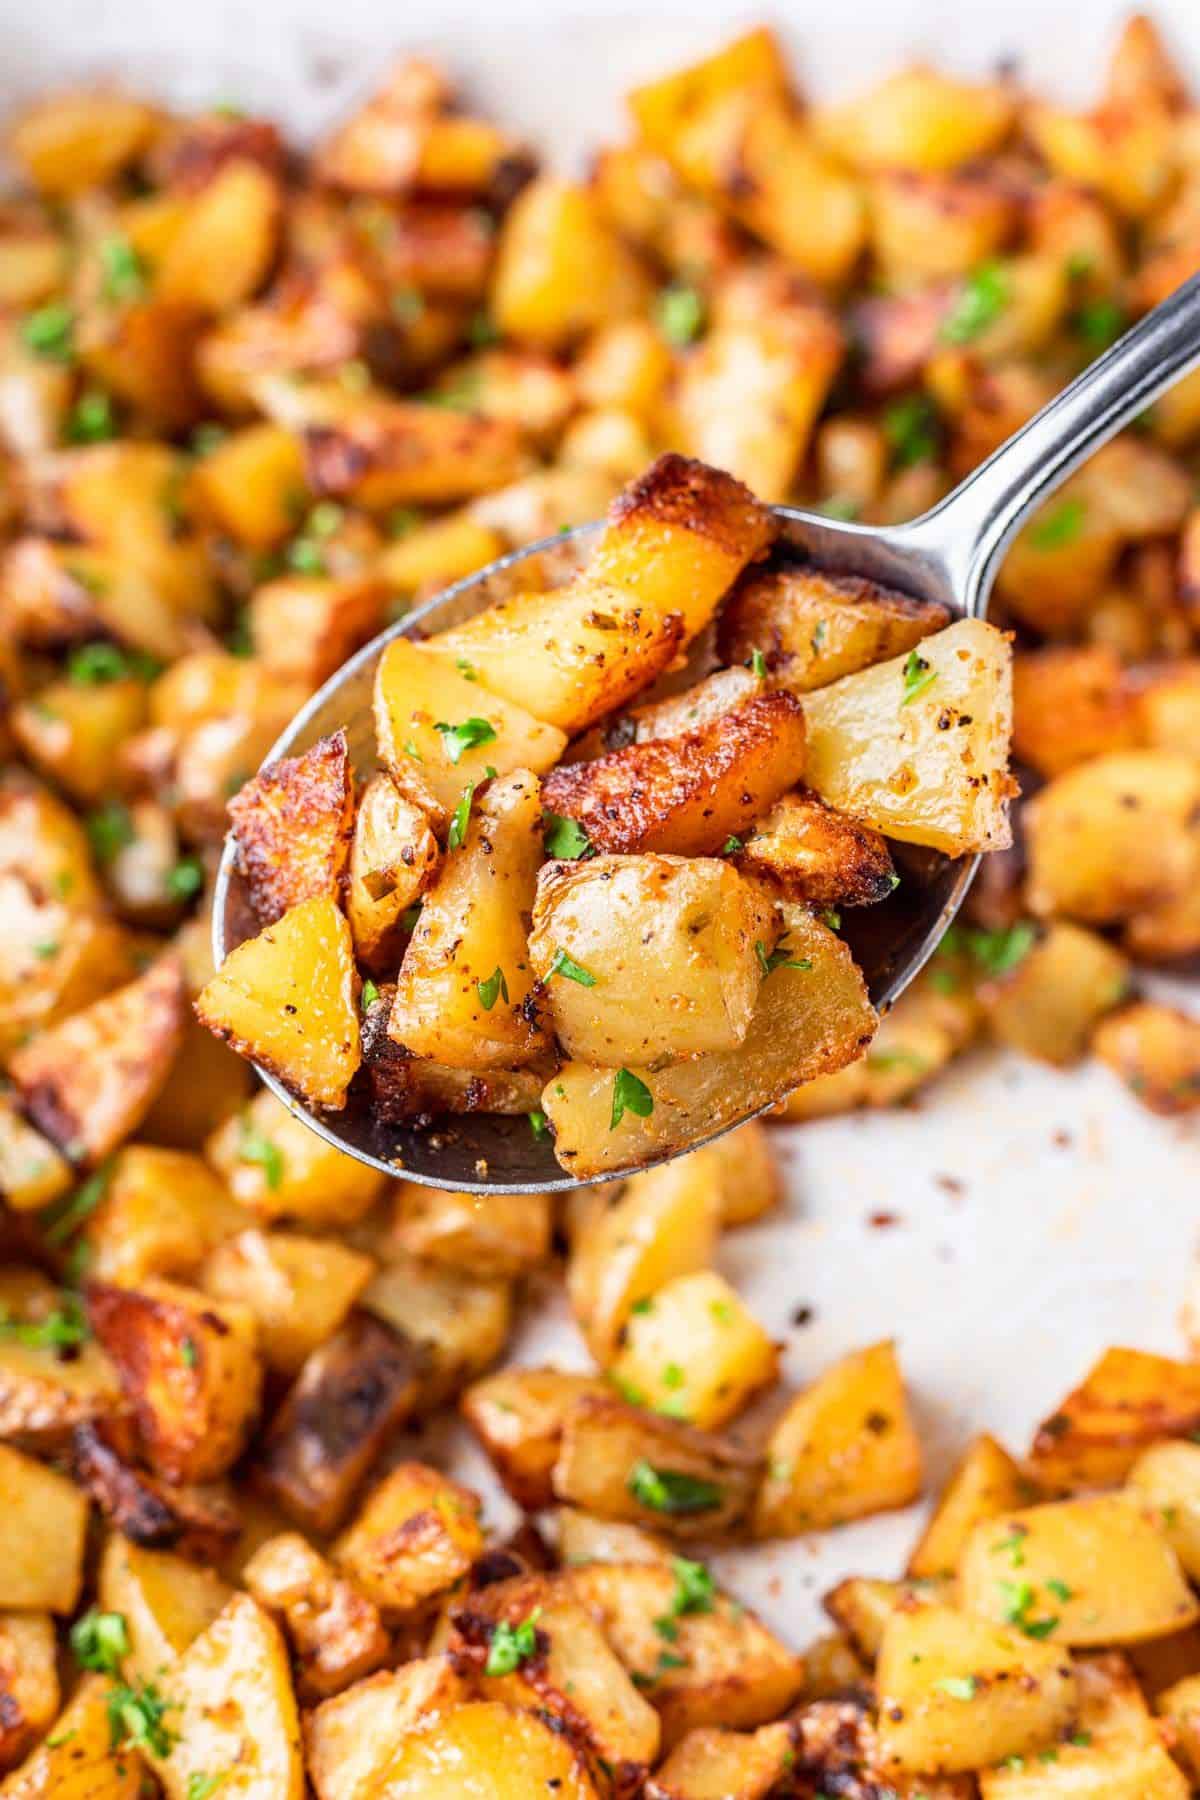 Spoonful of oven roasted potatoes.